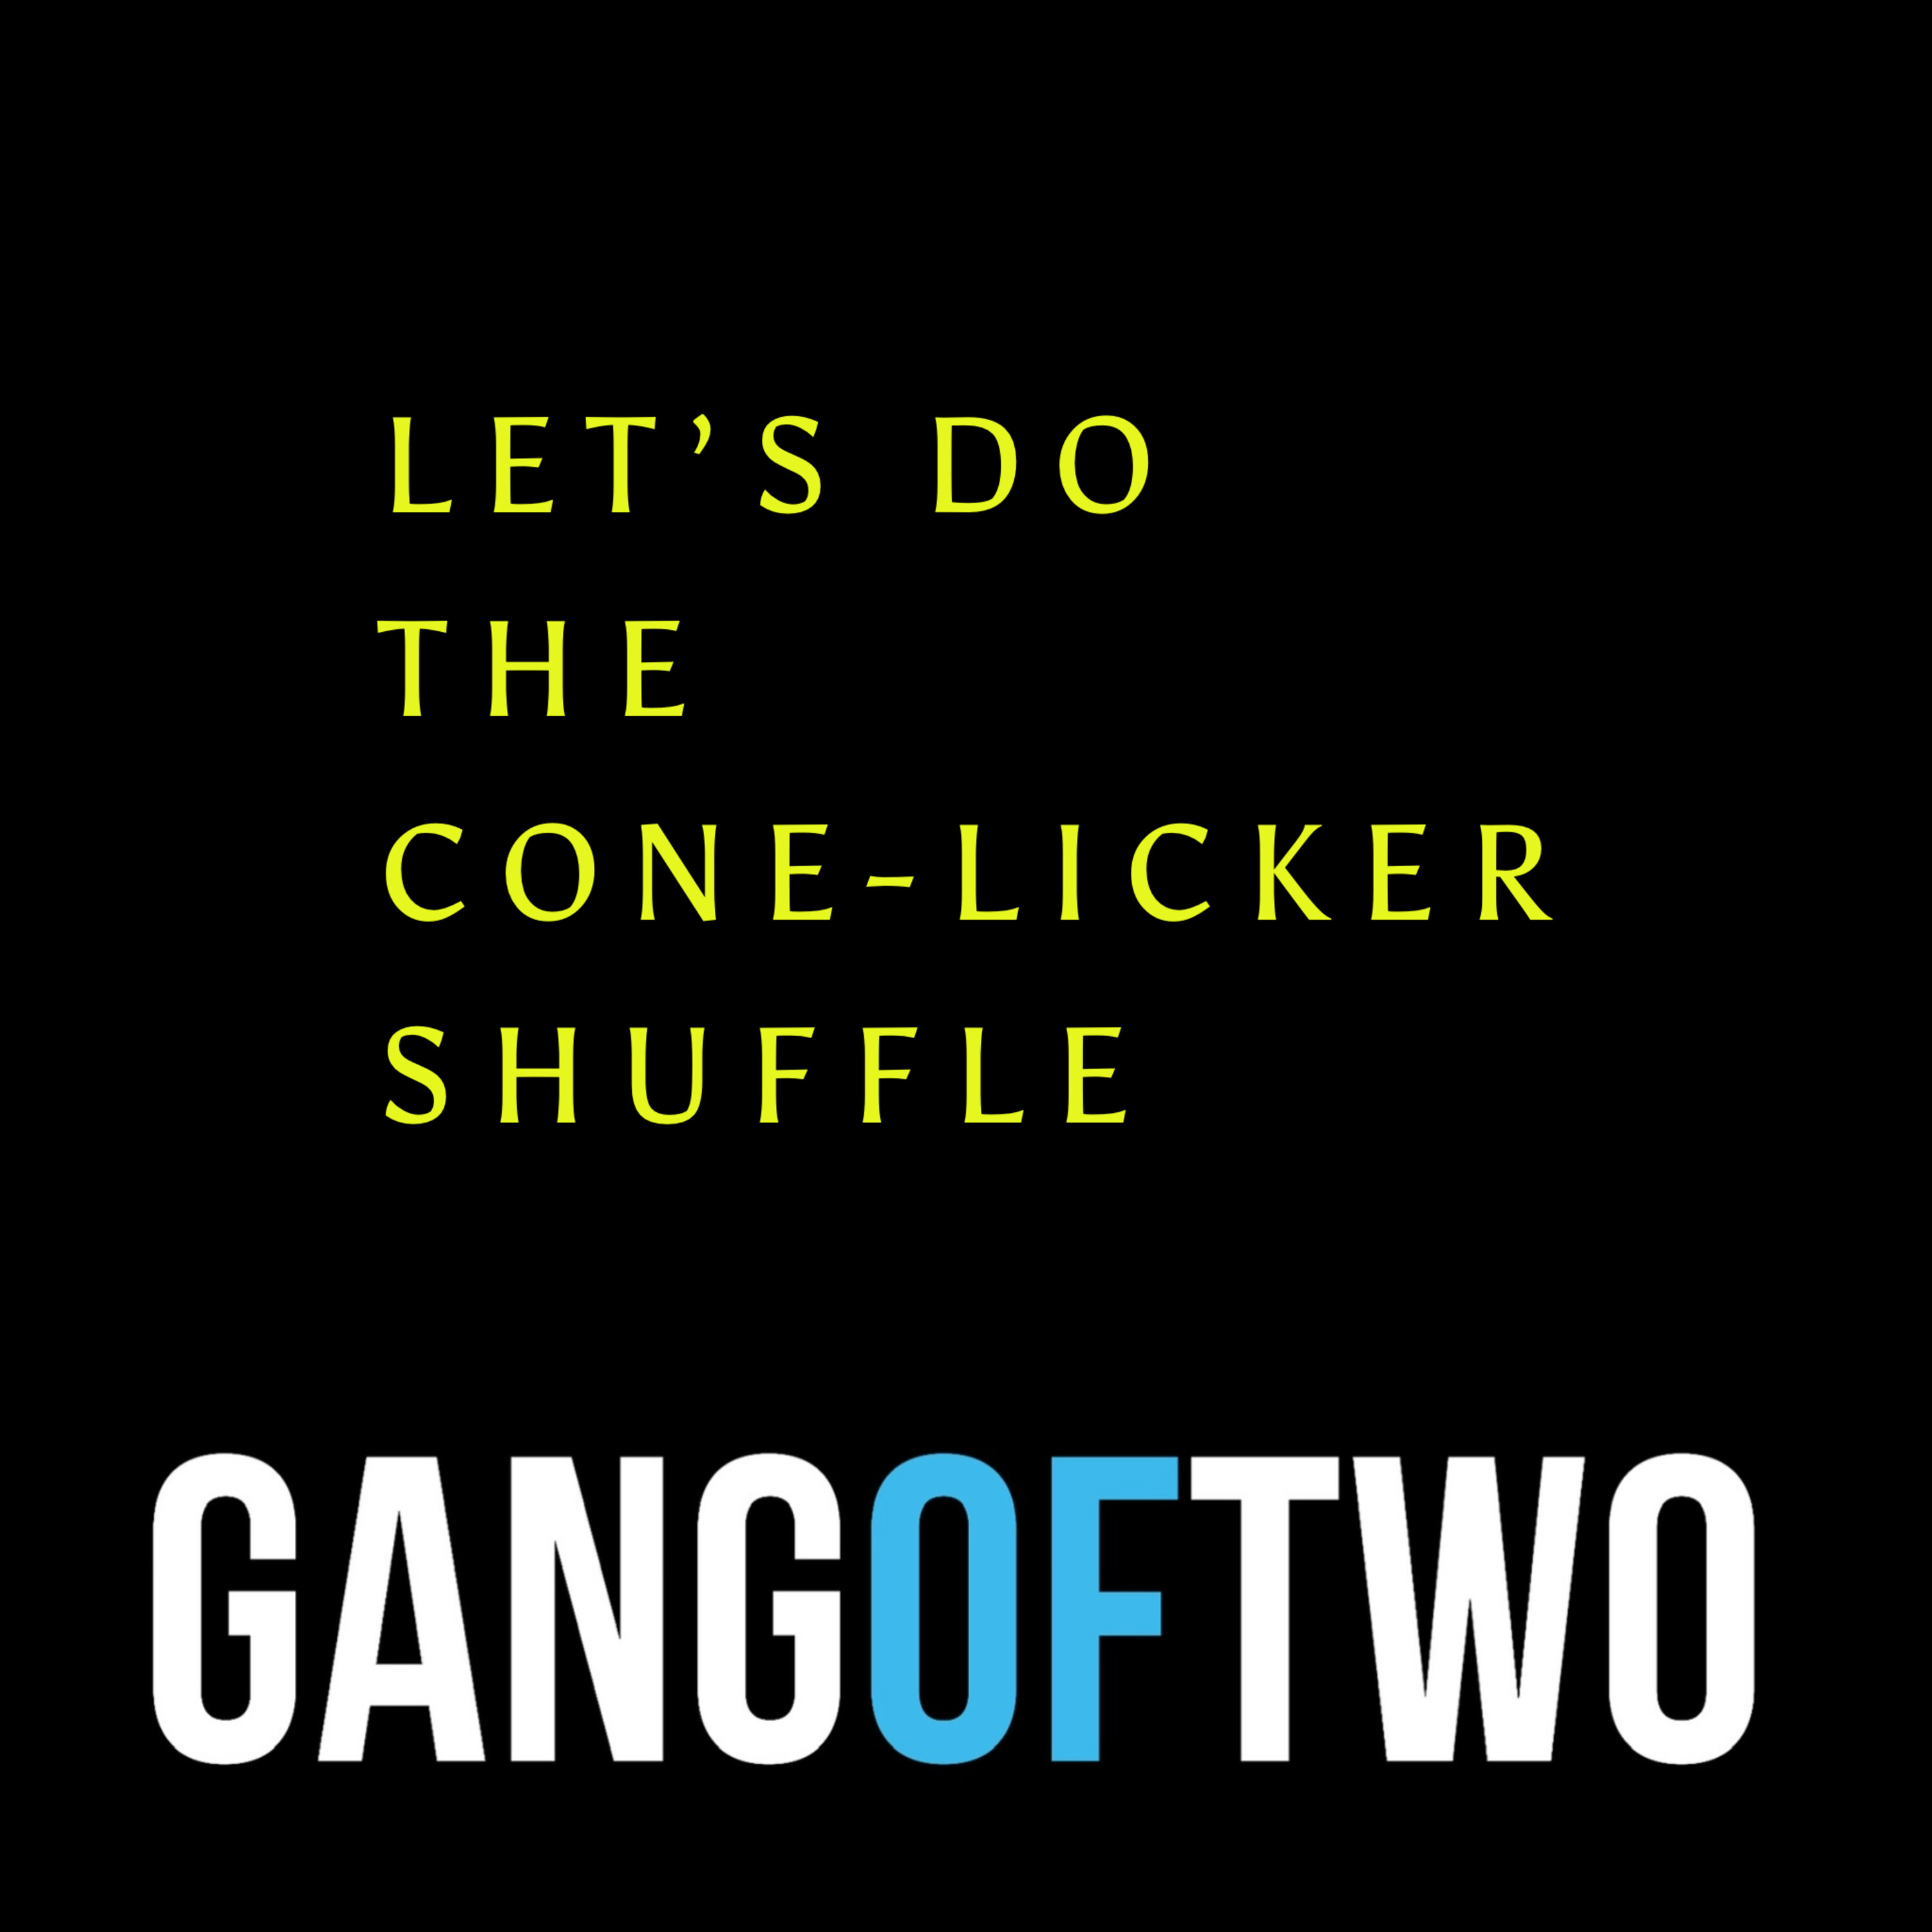 LET'S DO THE CONE-LICKER SHUFFLE Image